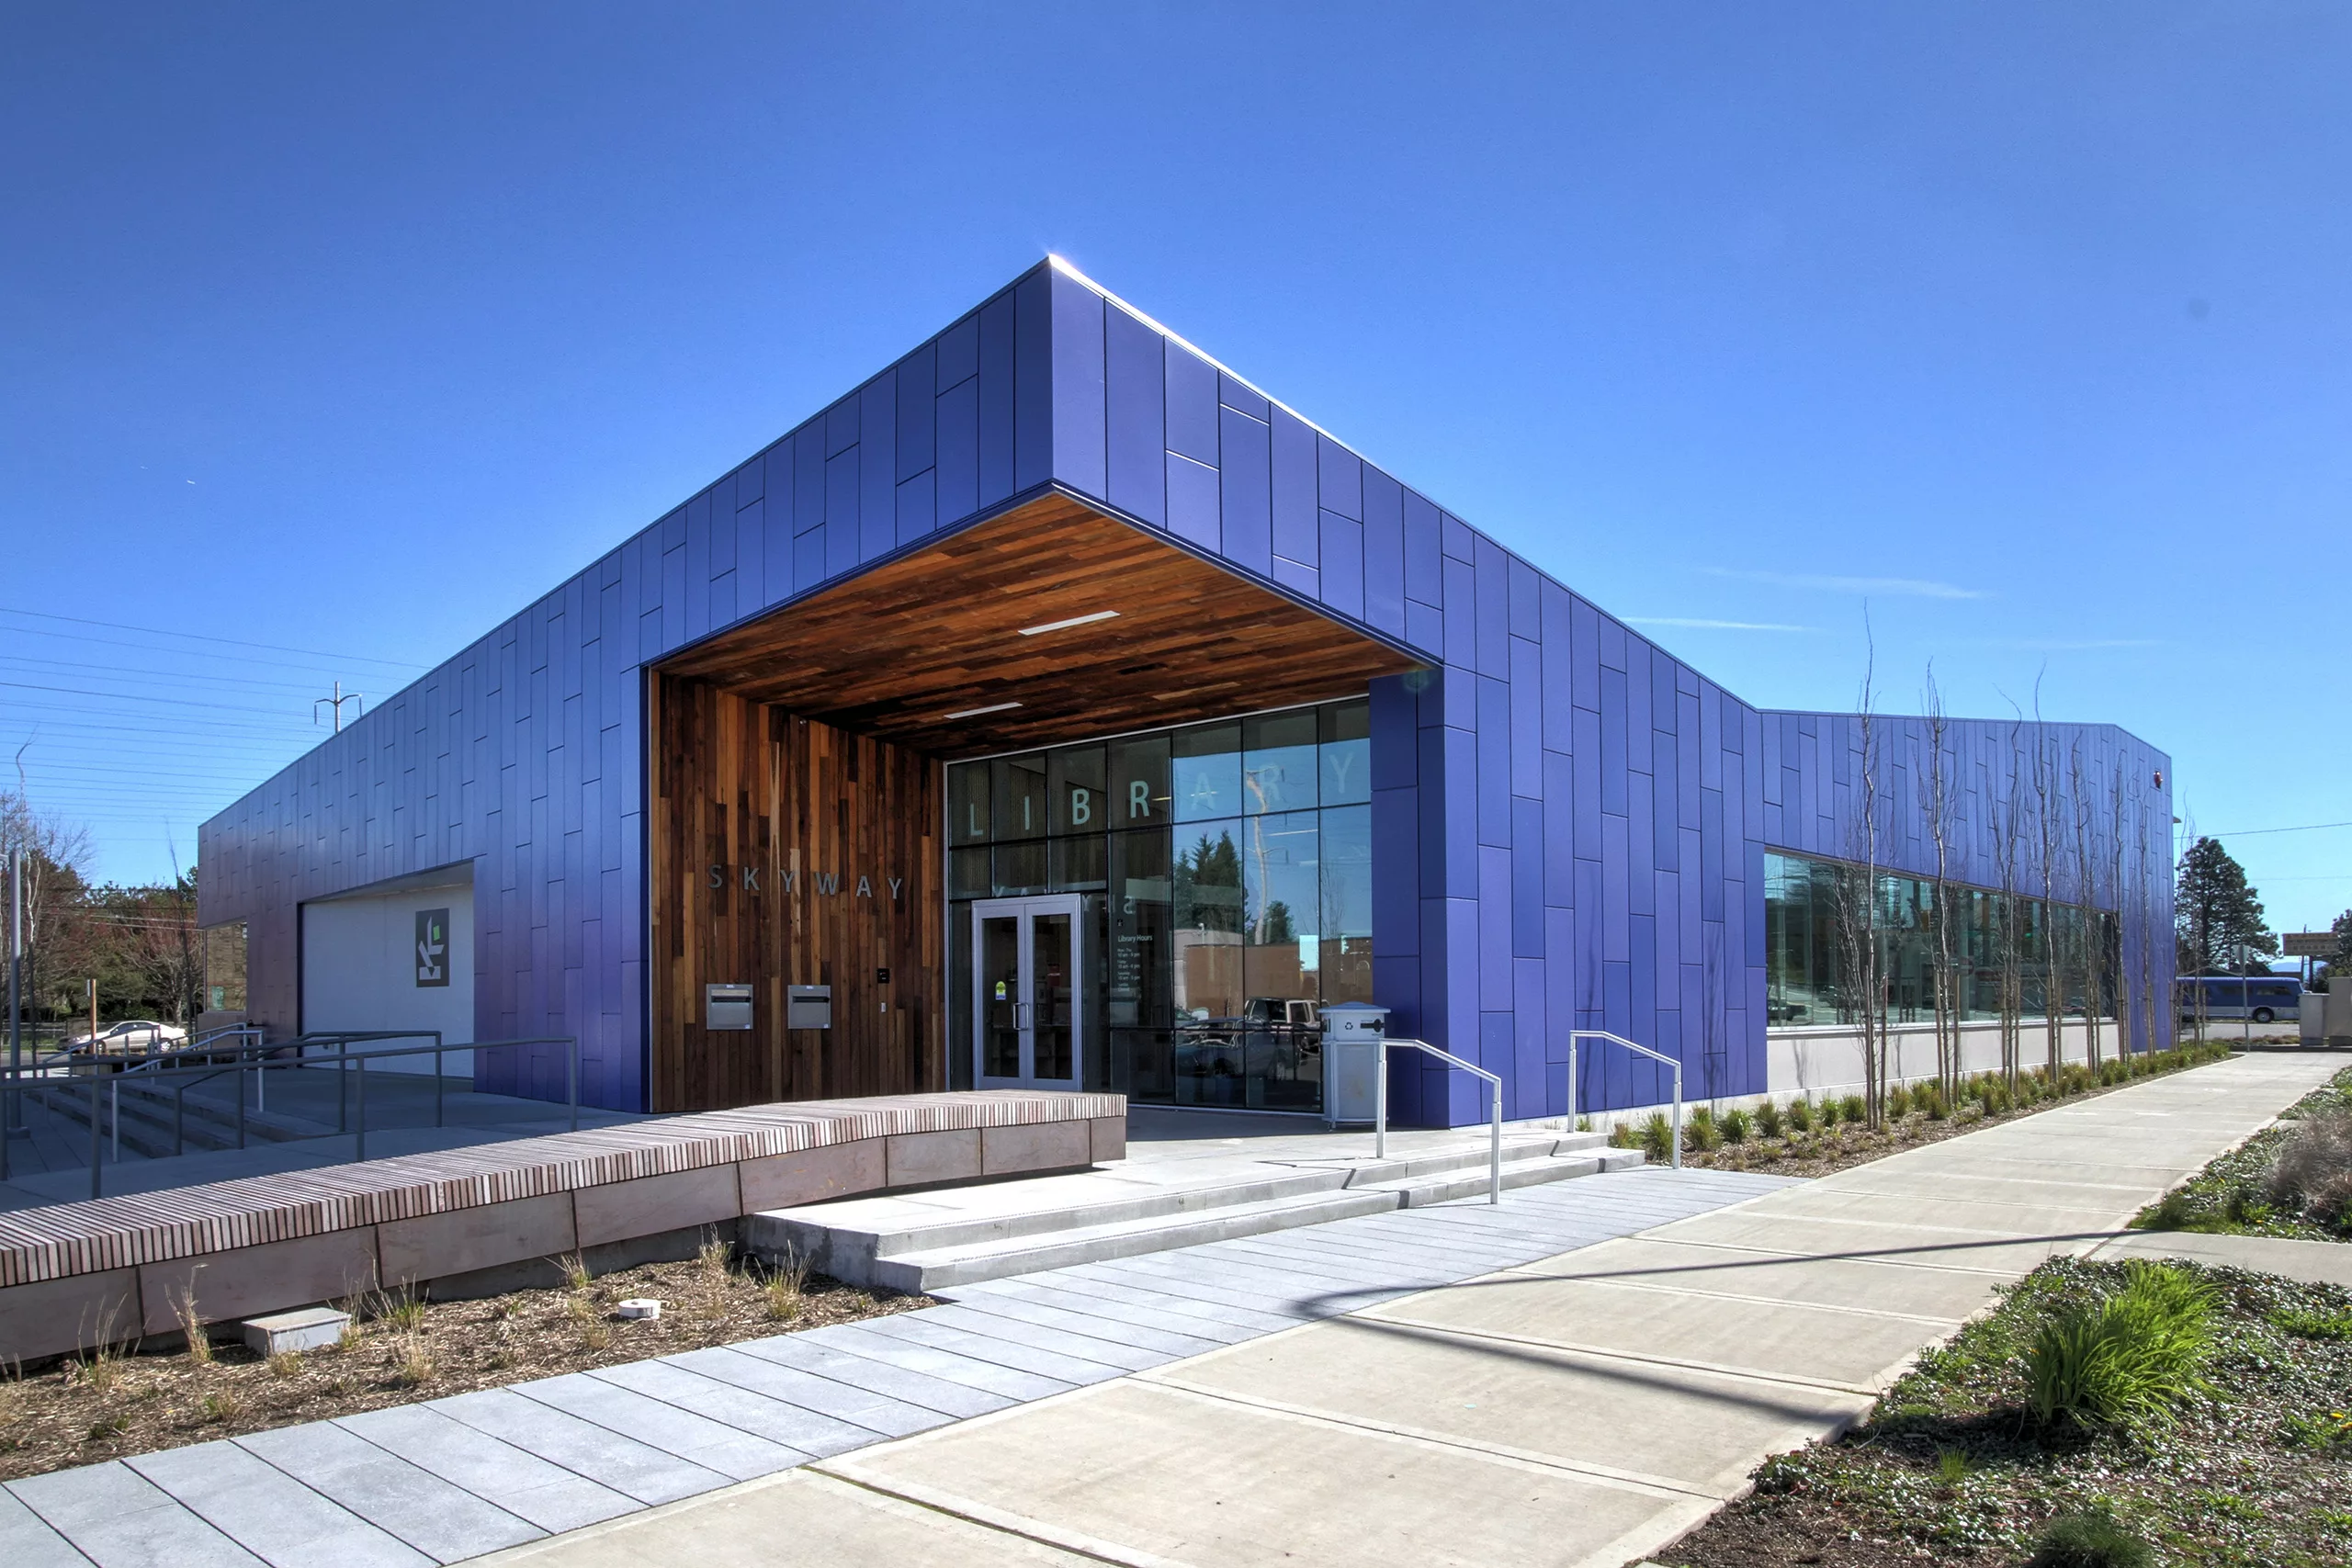 Exterior daylight view of the unique and sculpturally shaped Skyway Library featuring a deep blue aluminum 